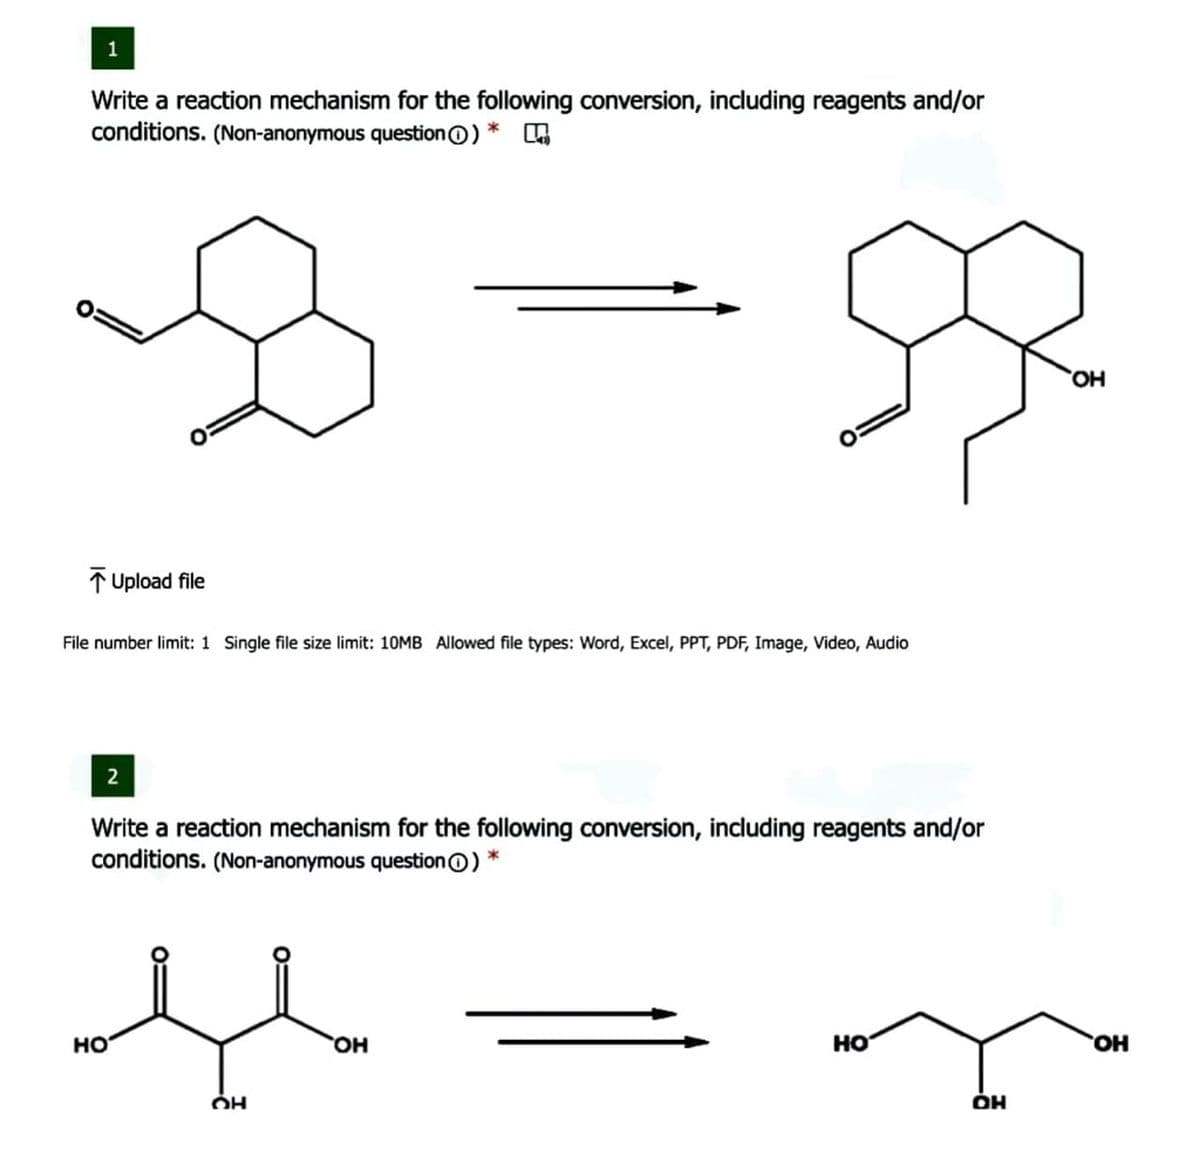 1
Write a reaction mechanism for the following conversion, including reagents and/or
conditions. (Non-anonymous question0) *
HO,
1 Upload file
File number limit: 1 Single file size limit: 10MB Allowed file types: Word, Excel, PPT, PDF, Image, Video, Audio
2
Write a reaction mechanism for the following conversion, including reagents and/or
conditions. (Non-anonymous question0) *
но
HO,
но
HO,
ÓH
